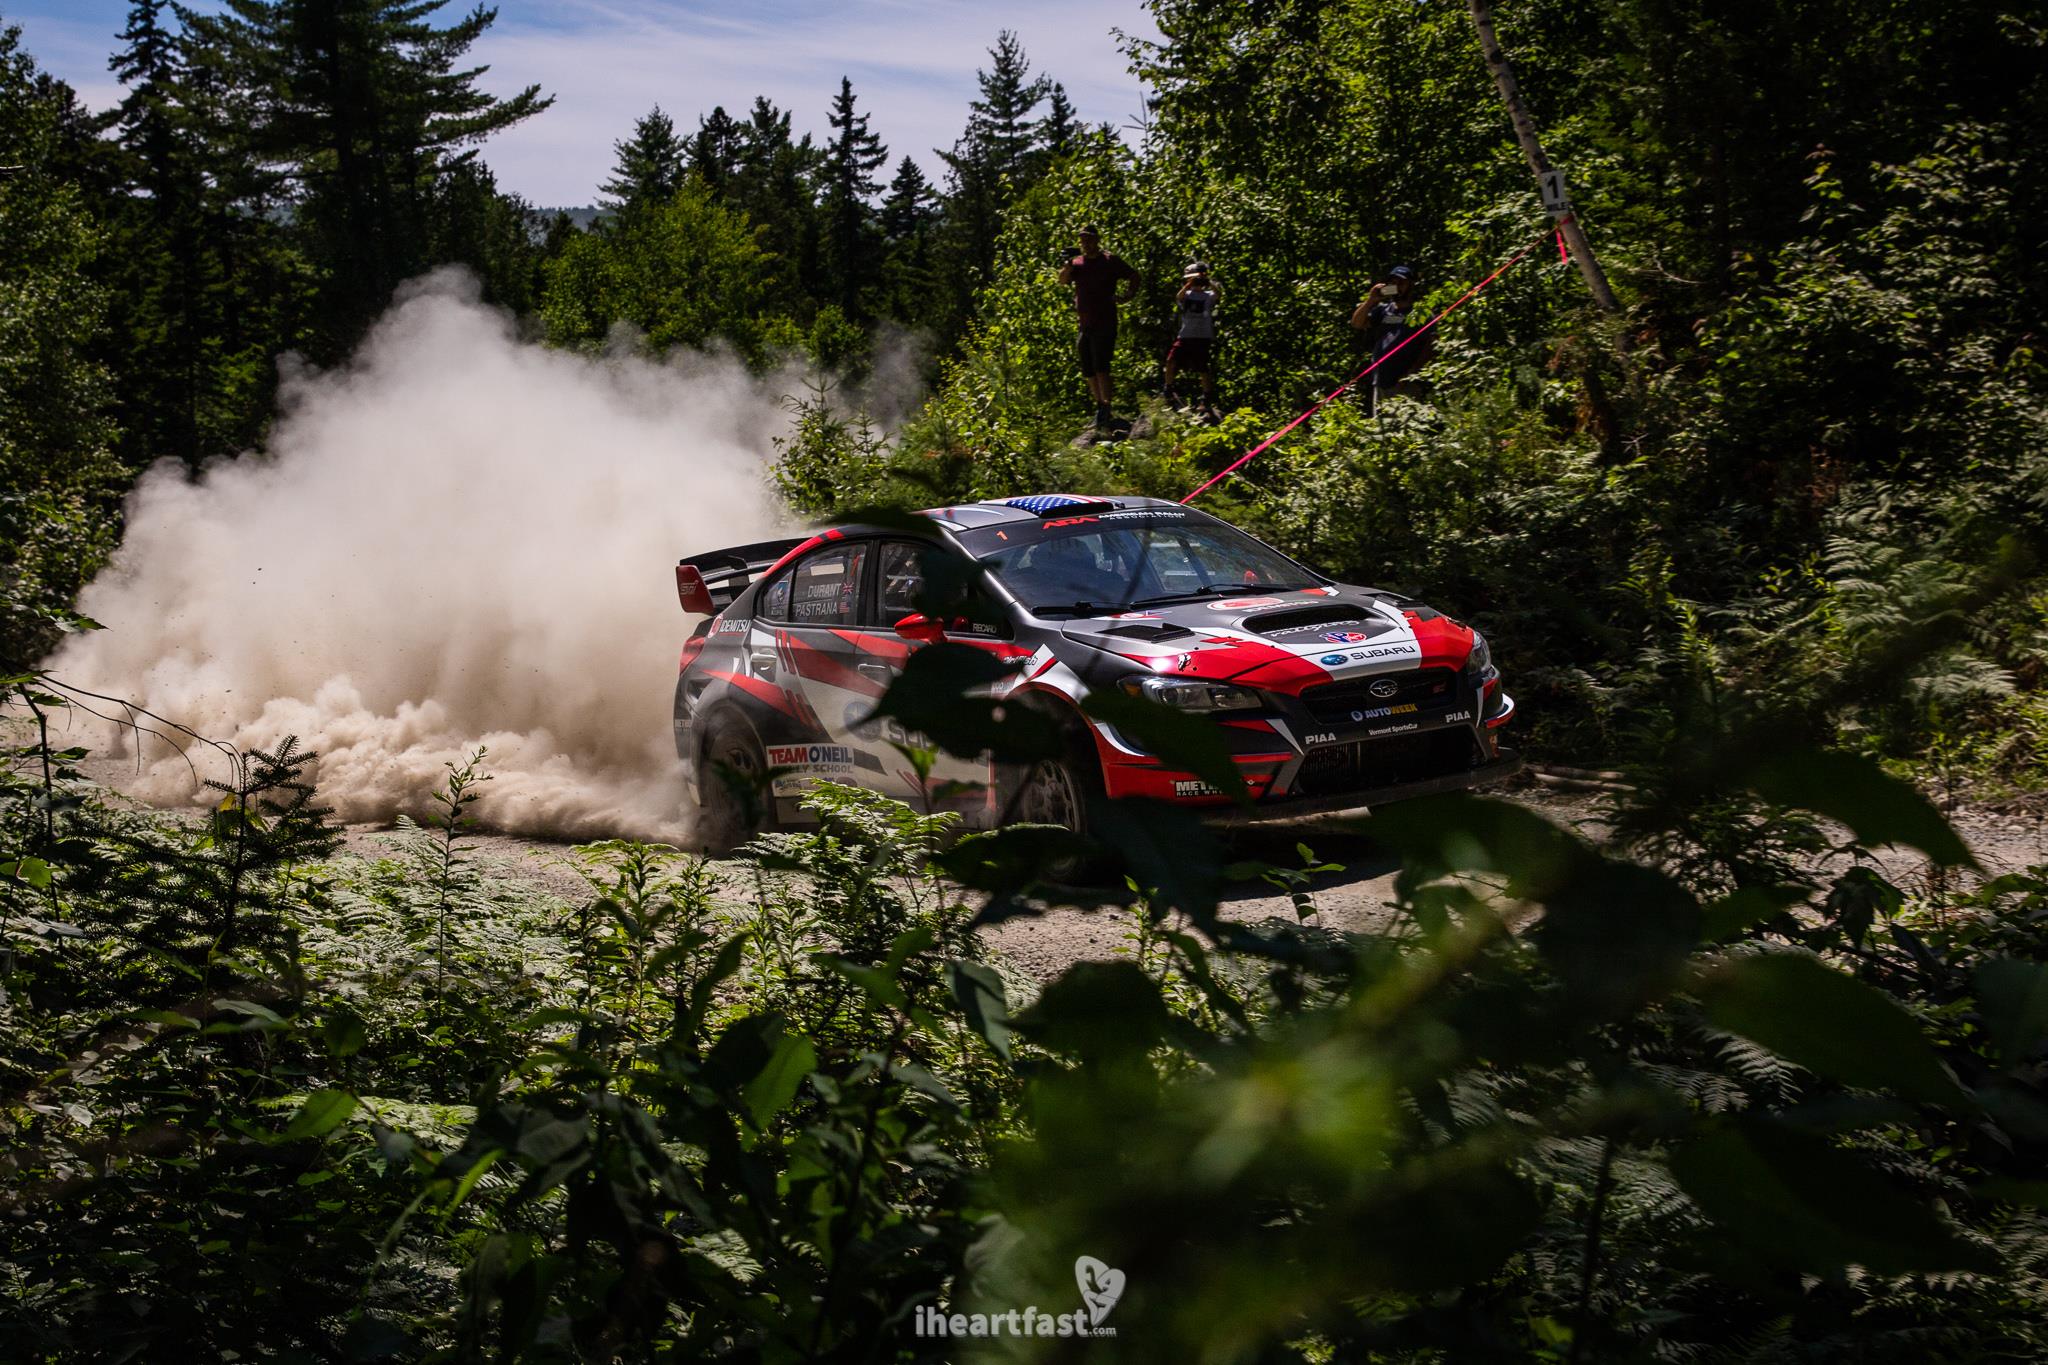 Travis Pastrana and Robbie Durant kicking up a cloud of dust at NEFR